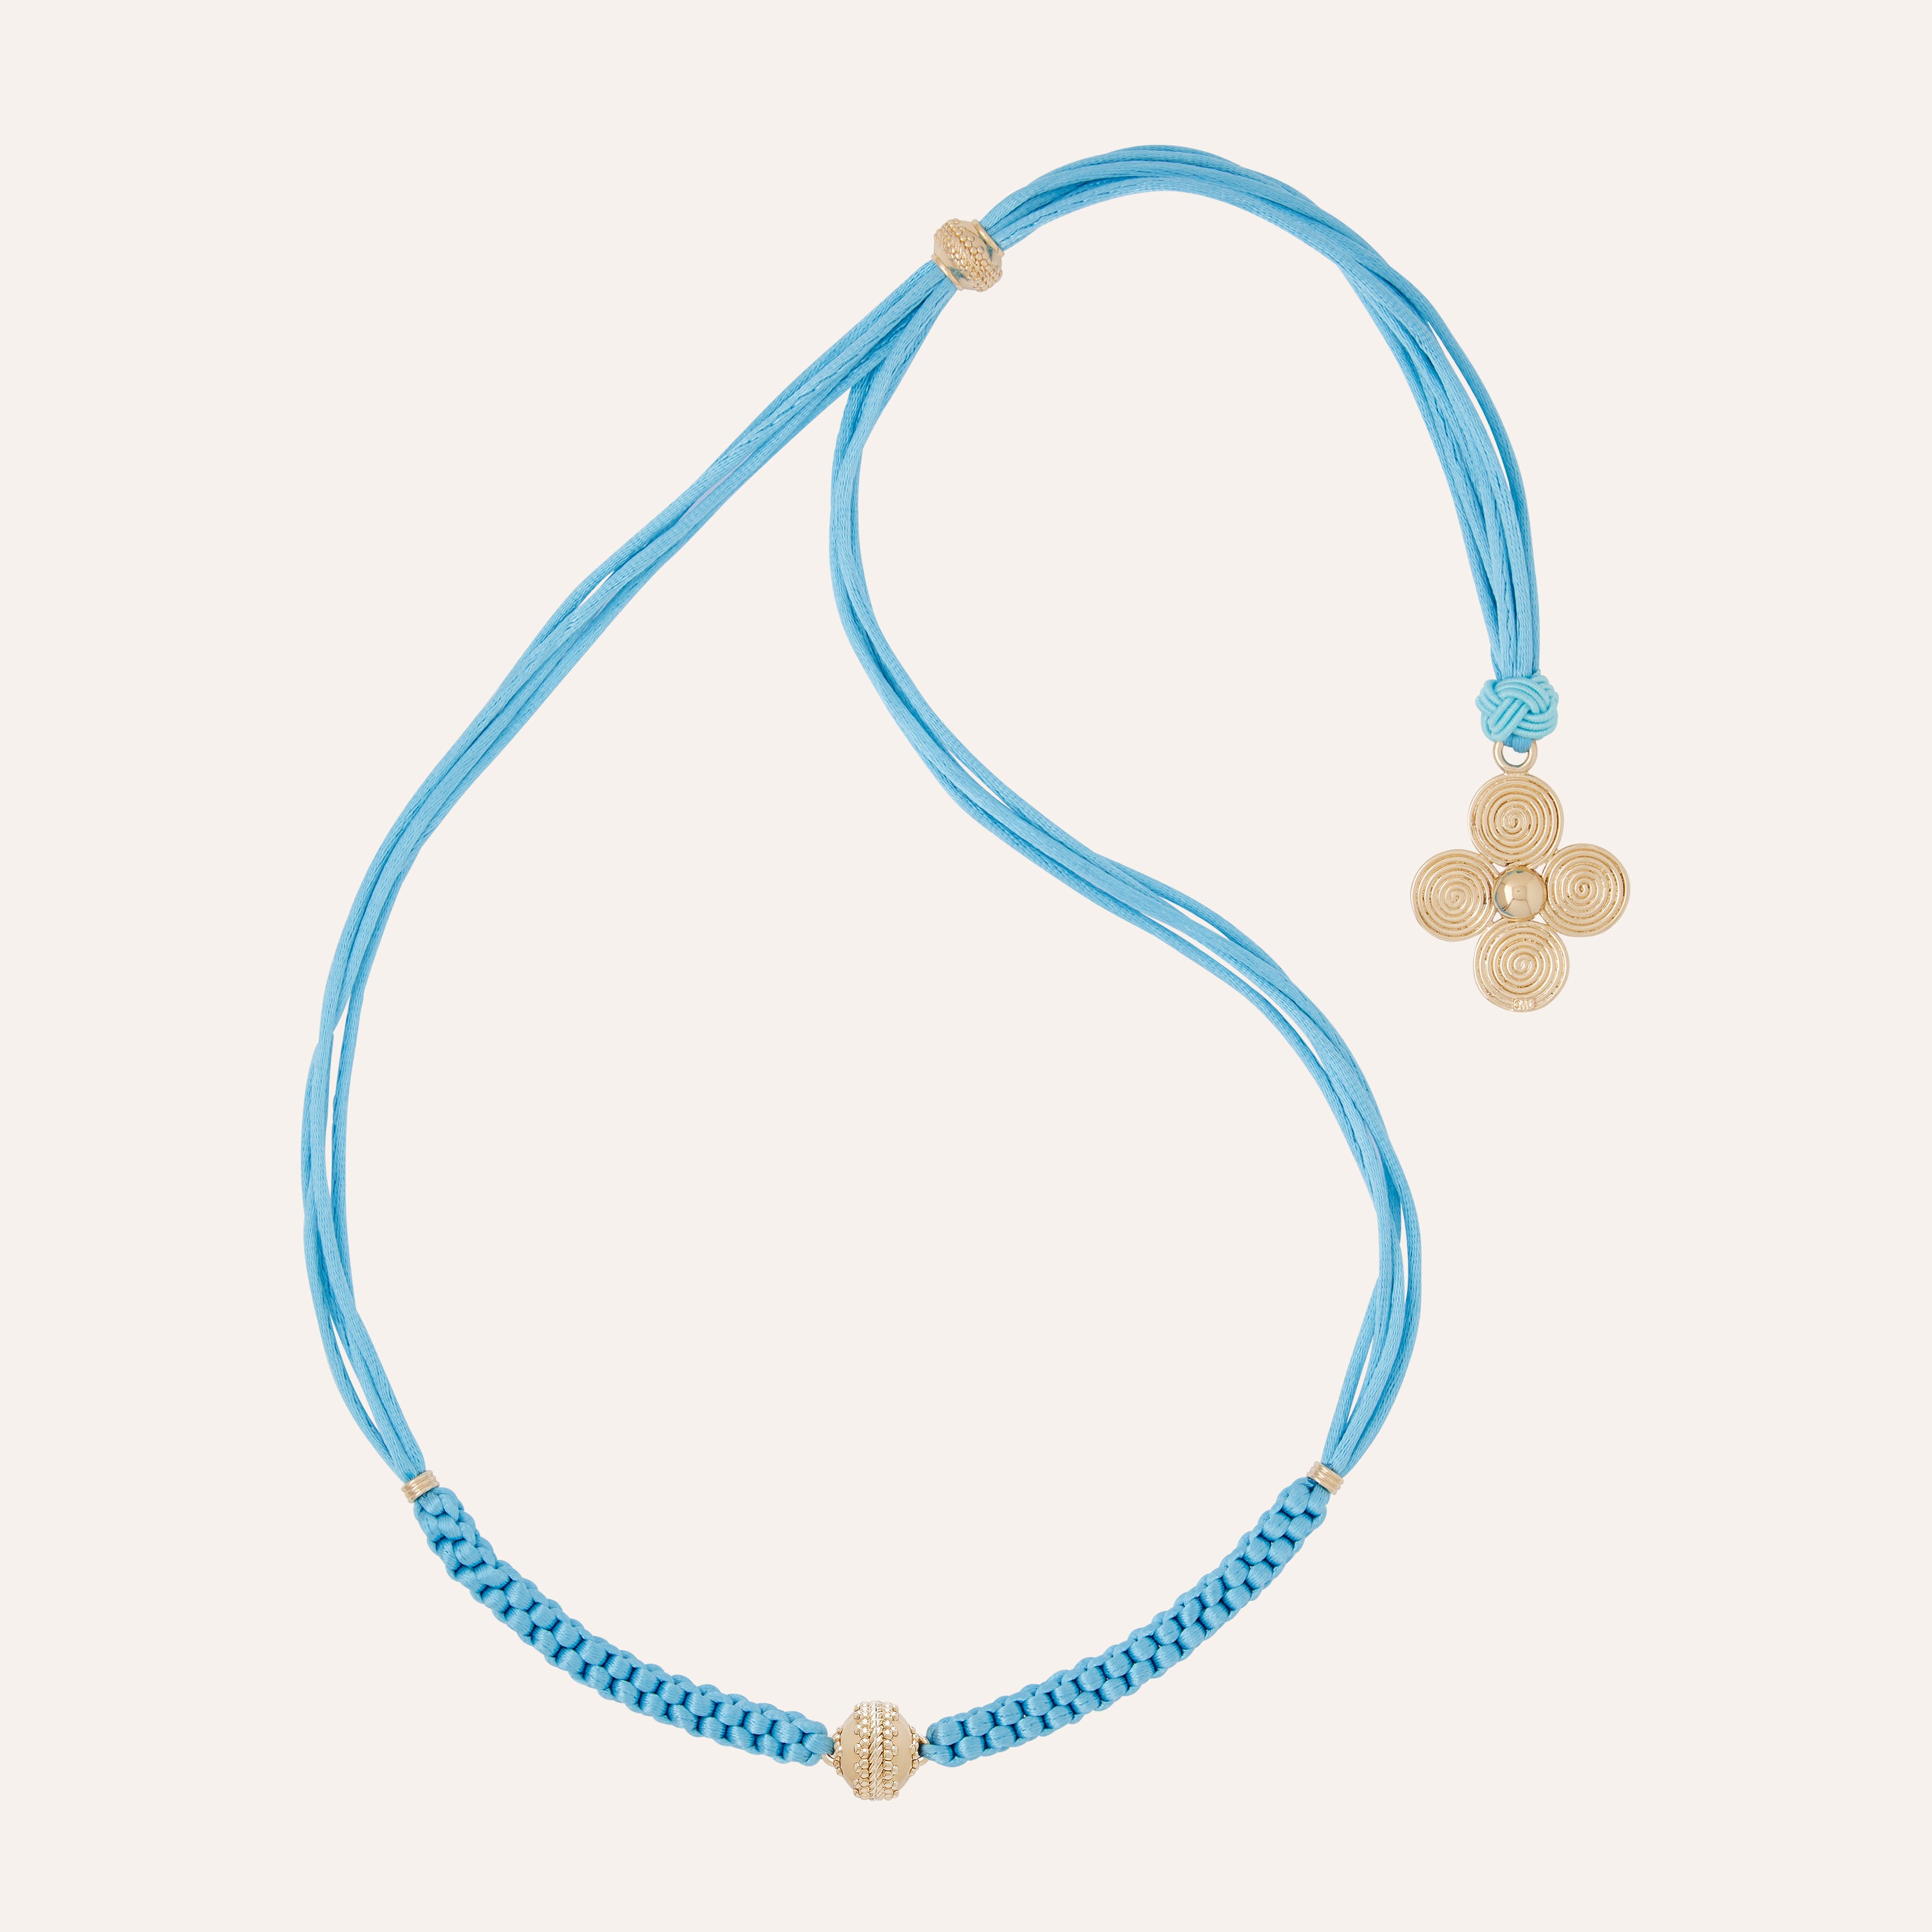 Knotted Heritage Petal Turquoise Necklace